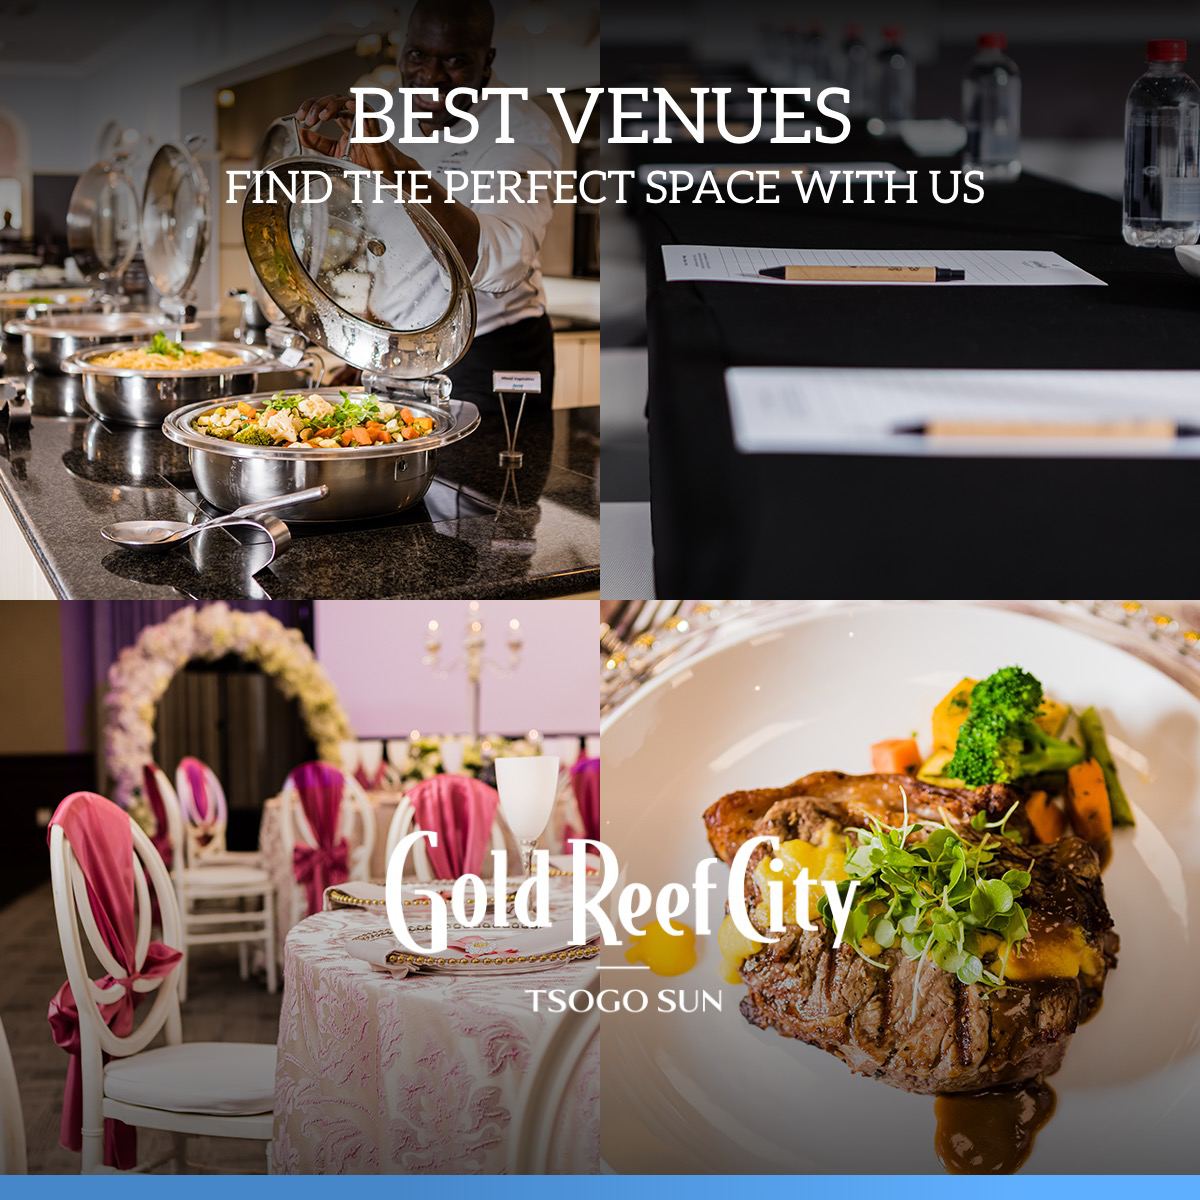 Looking for a venue to host your dream event? Gold Reef City is the place! It’s not just about thrilling rides & high stakes - it’s about making your goals & ambitions a reality! Enquire today at 011 248 5700 or goldreefcity.co.za